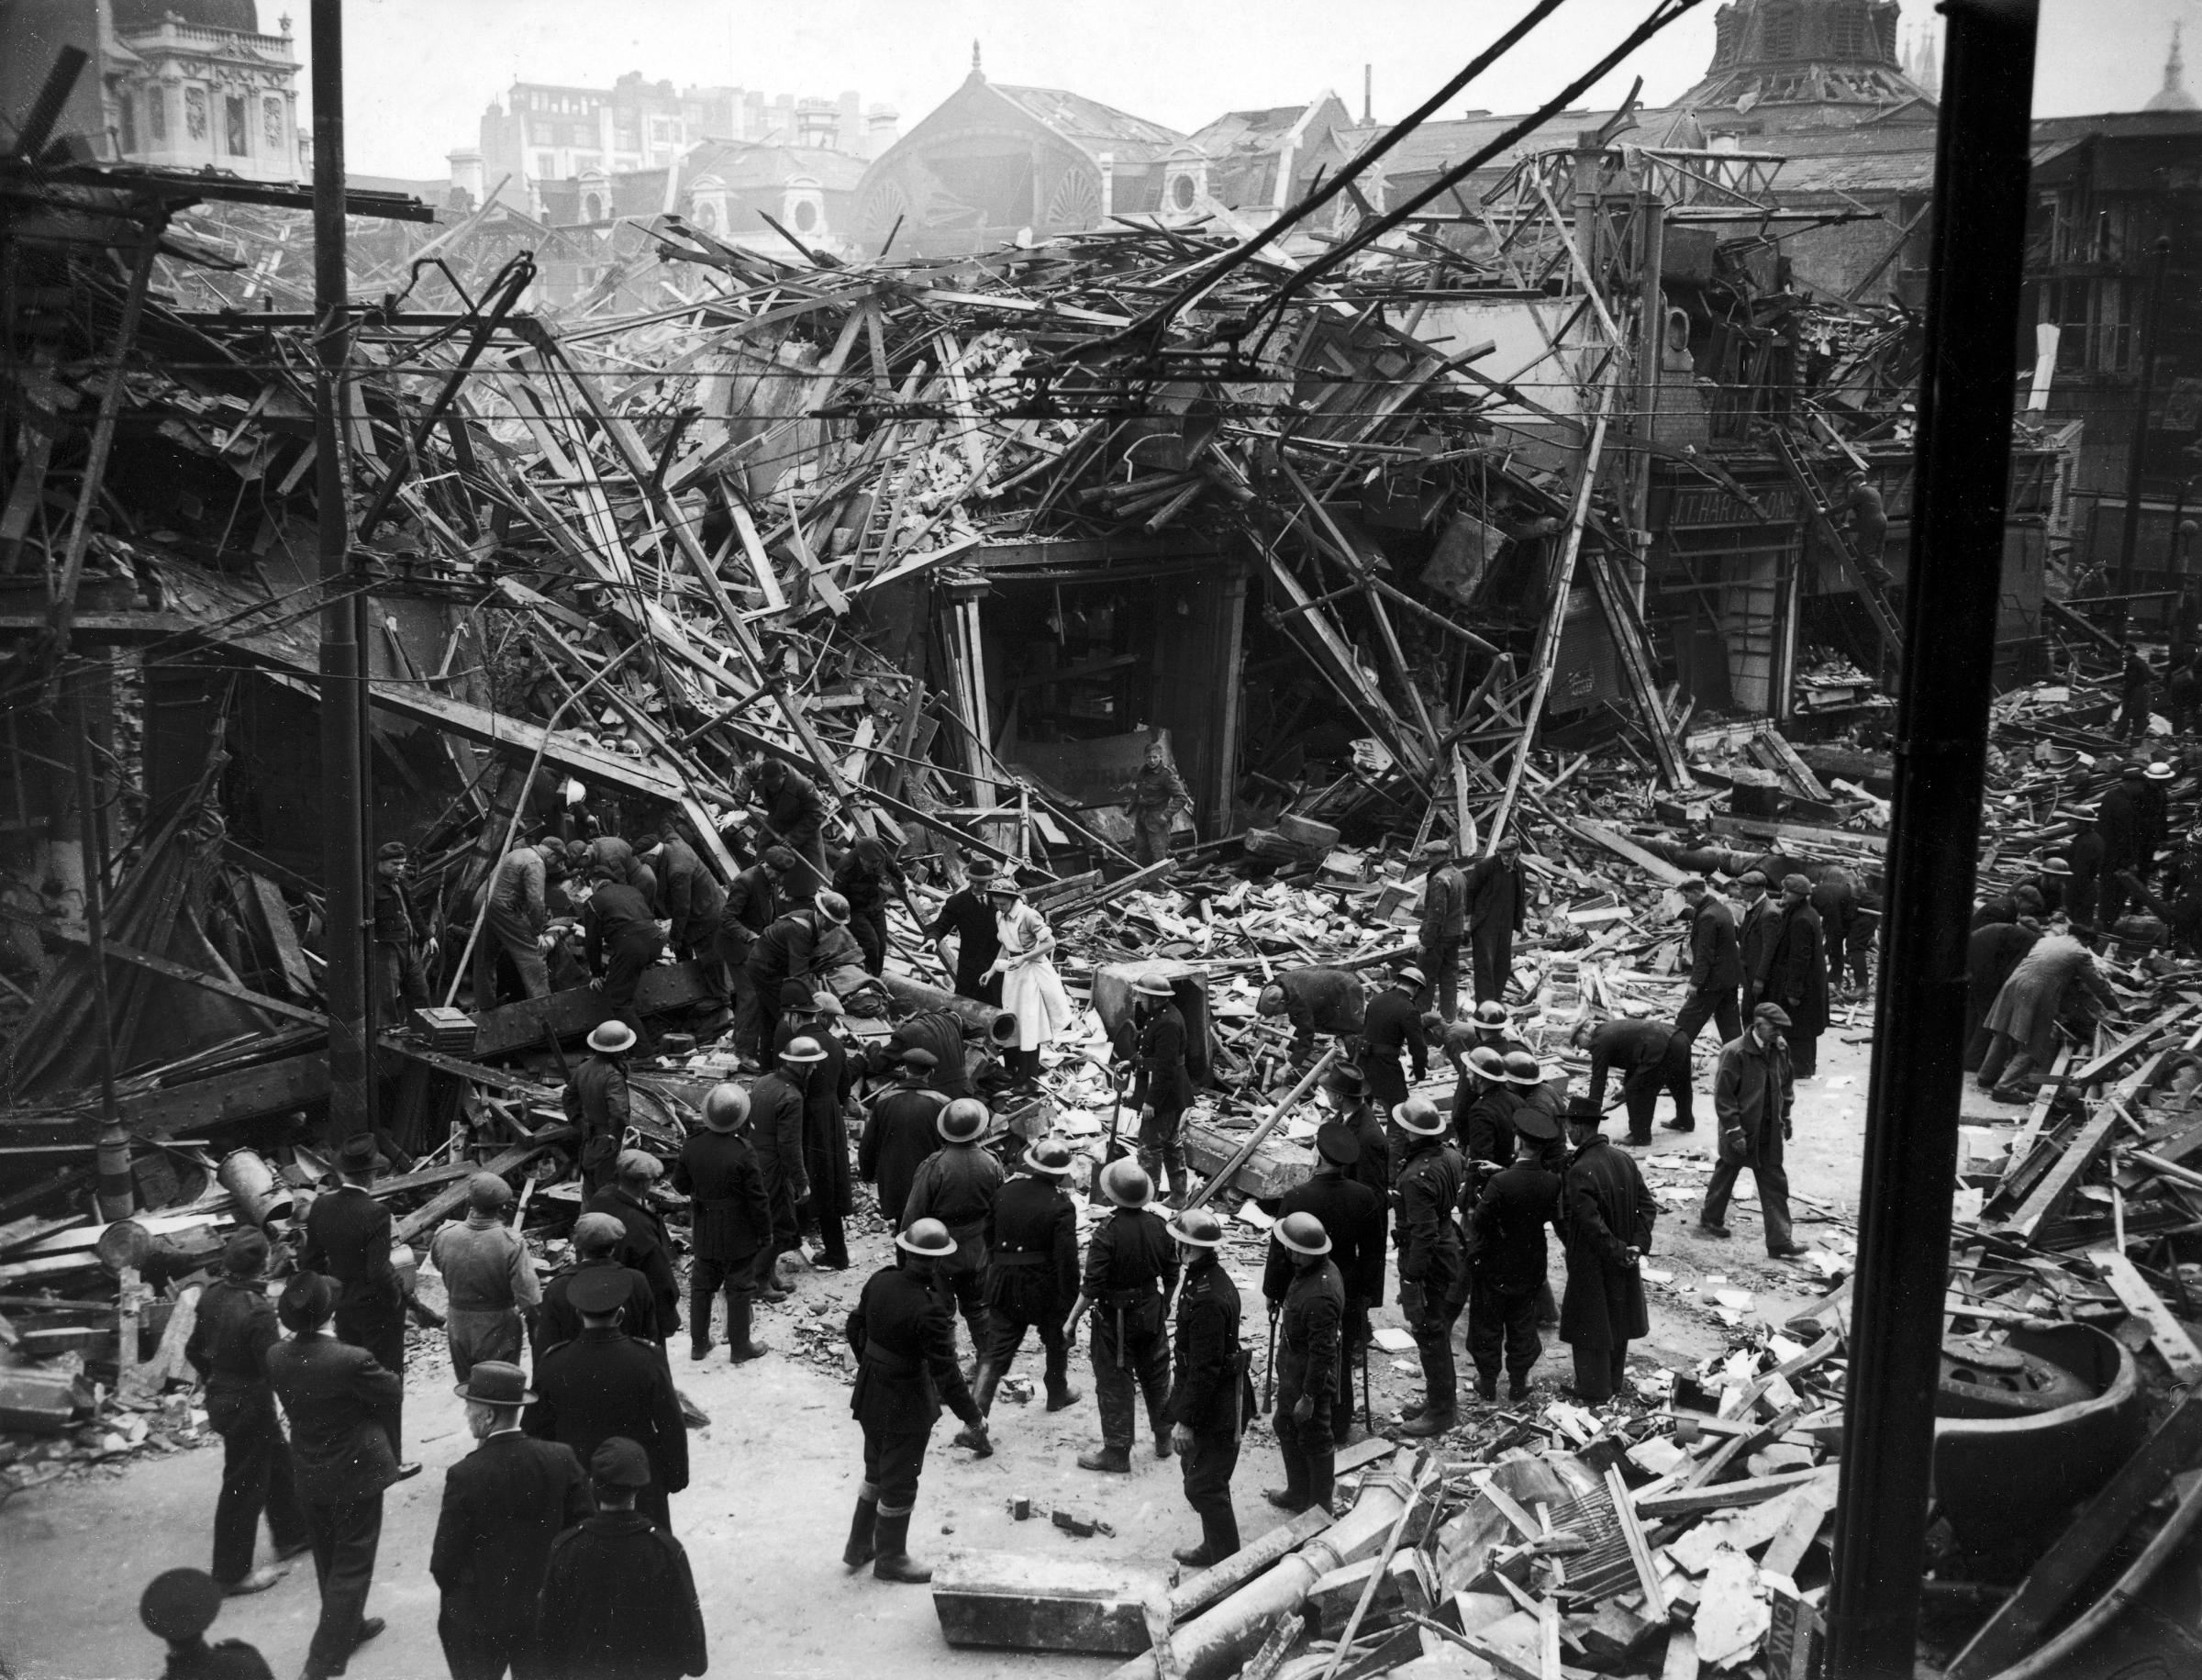 Rescue workers help pull victims from ruins of a building hit by a German V-1 "flying bomb" rocket, July 1944.